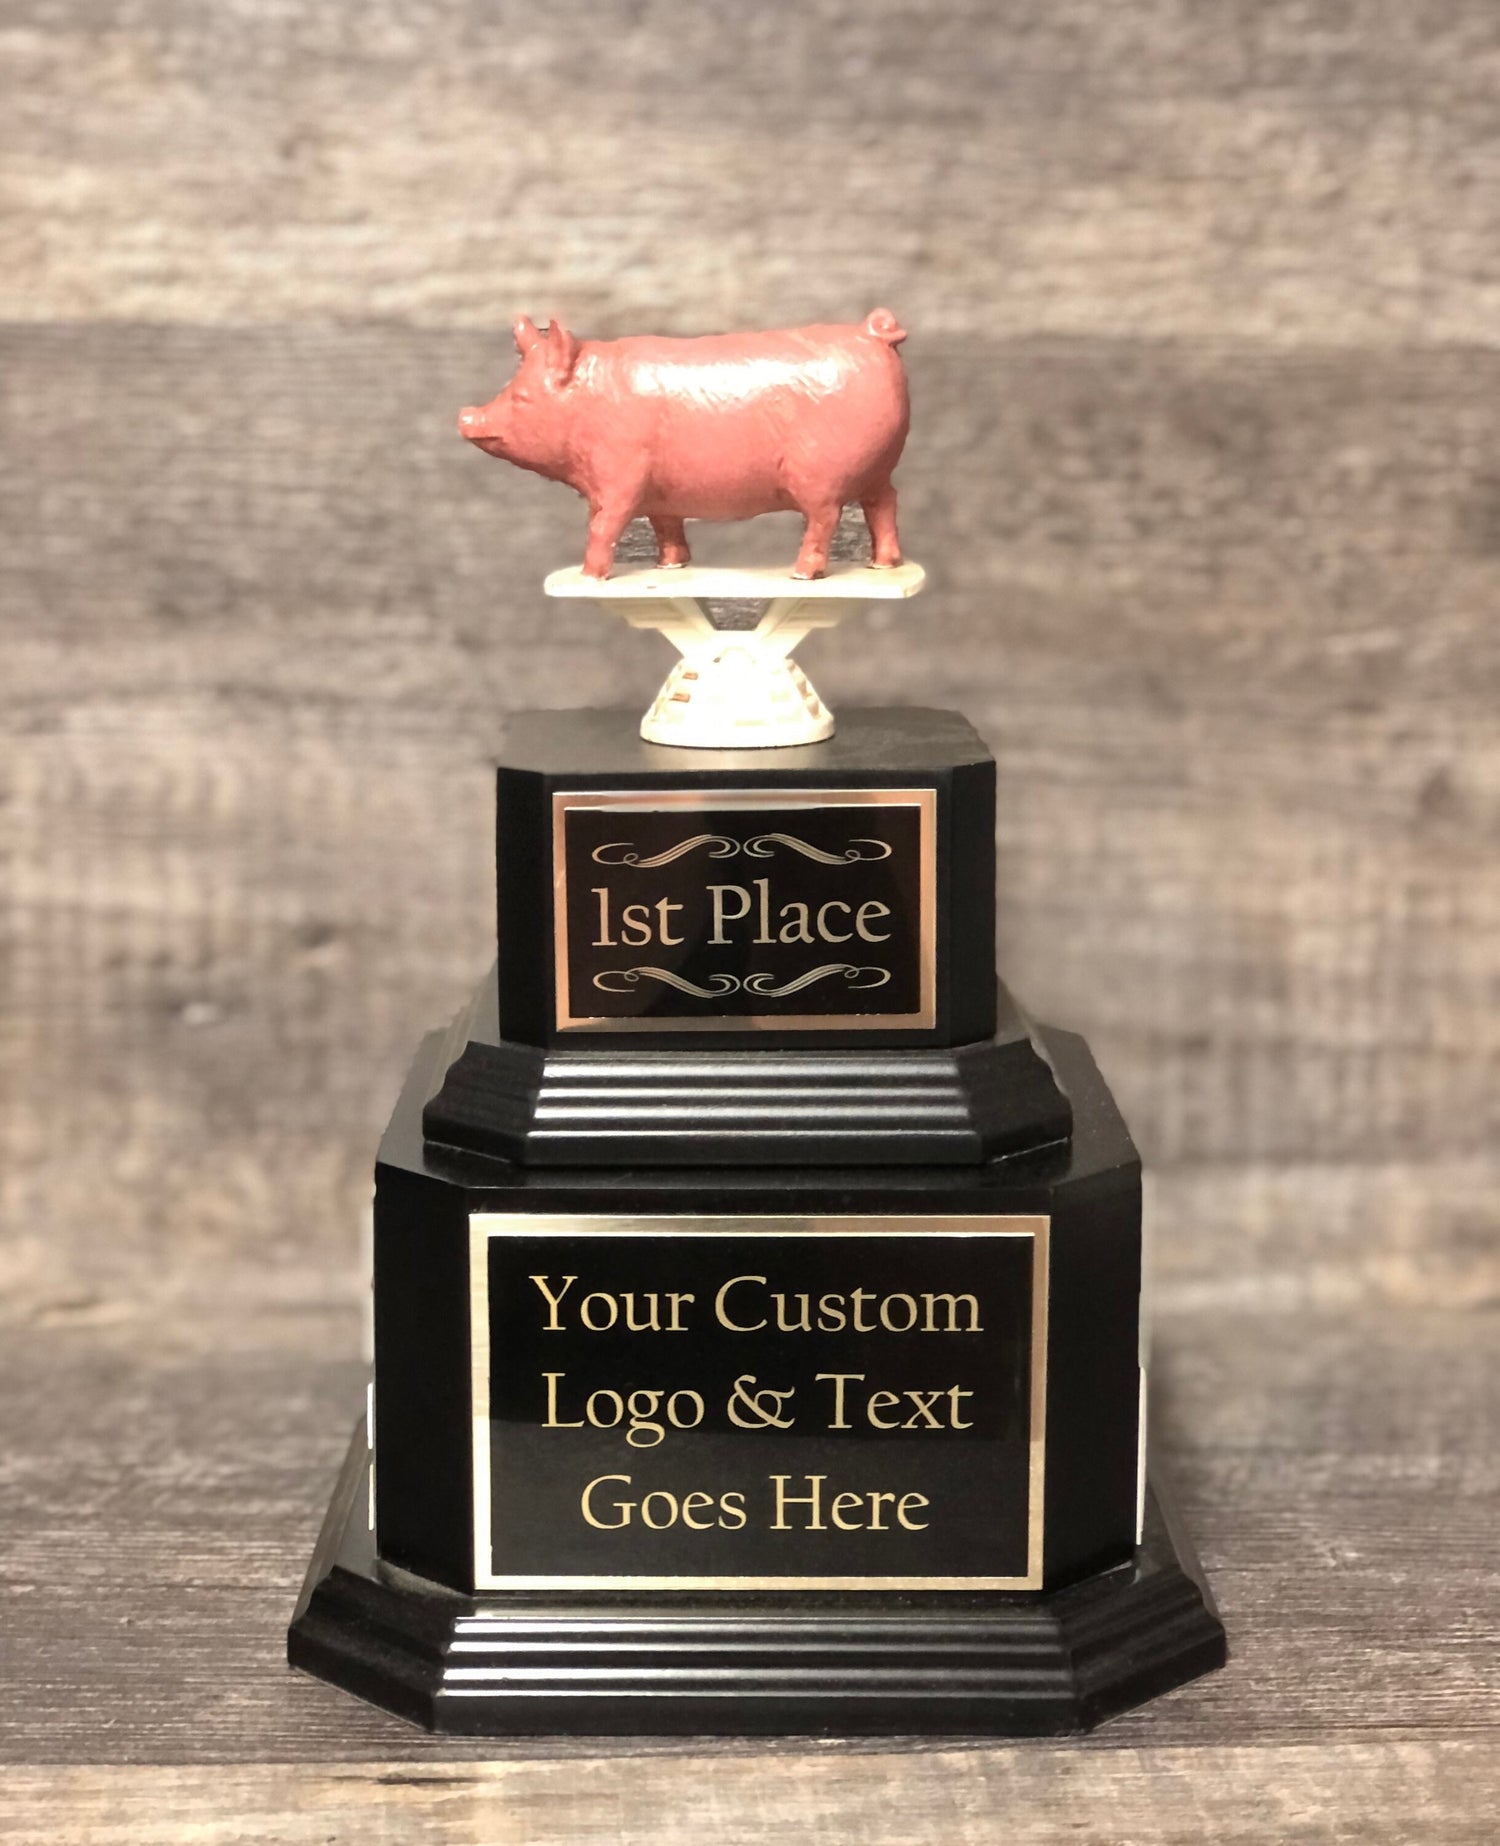 BBQ Trophy Perpetual Competition Cook Off Champion Trophy Best BBQ Trophy Pig Trophy Best Ribs Best Chicken Best Beef Trophy Award Winner